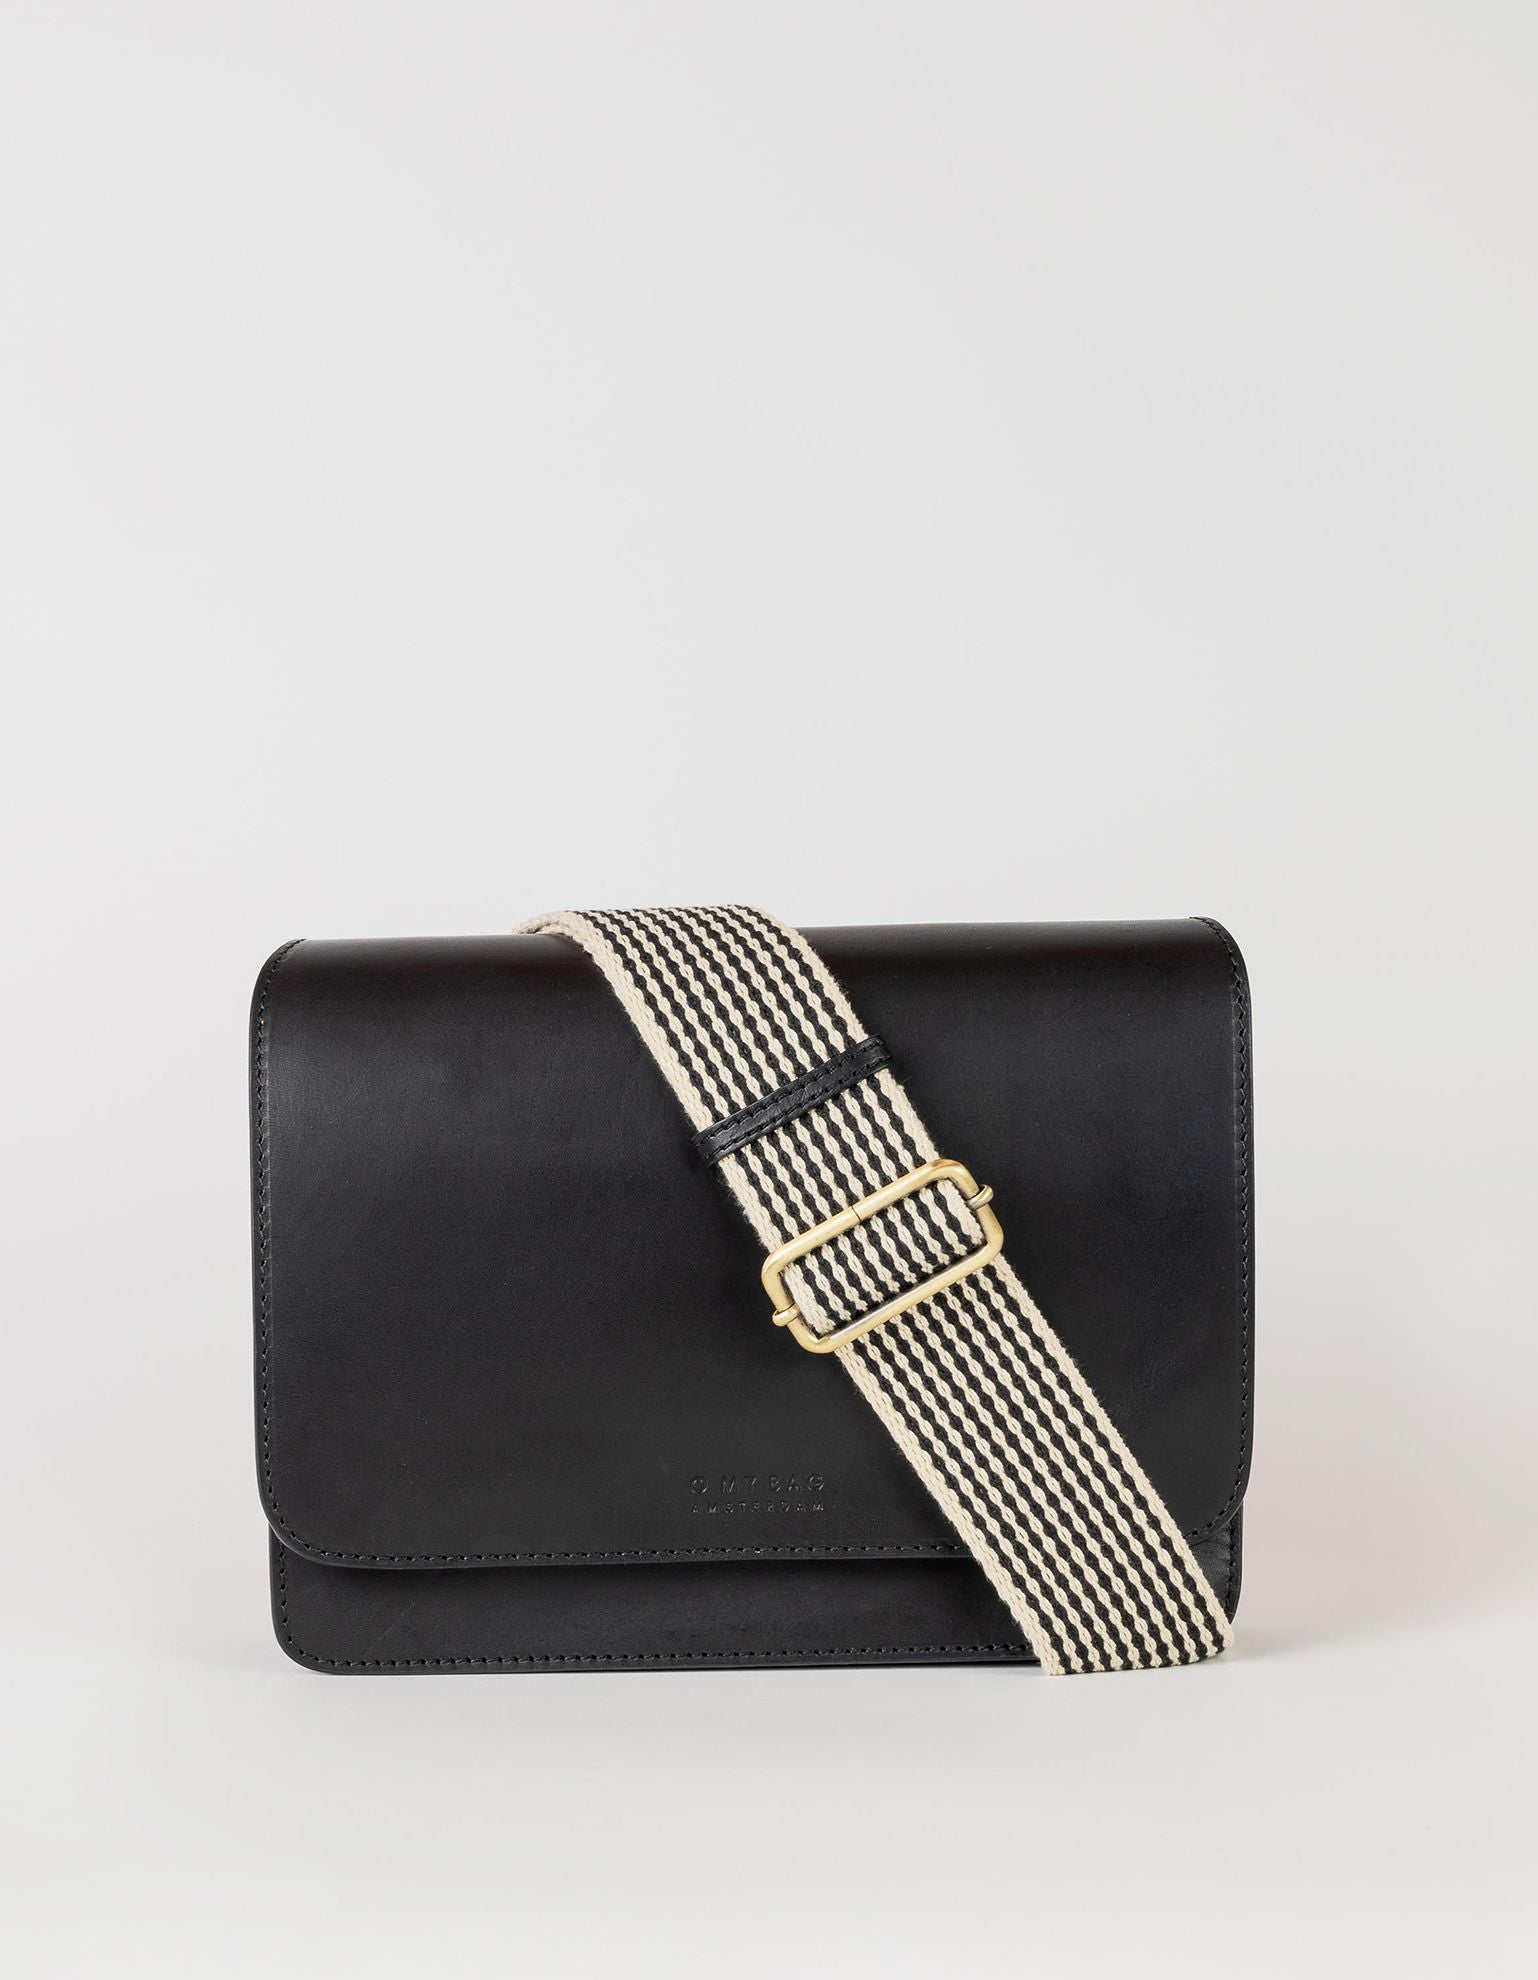 Audrey black classic leather bag. With webbing strap. Front product image.